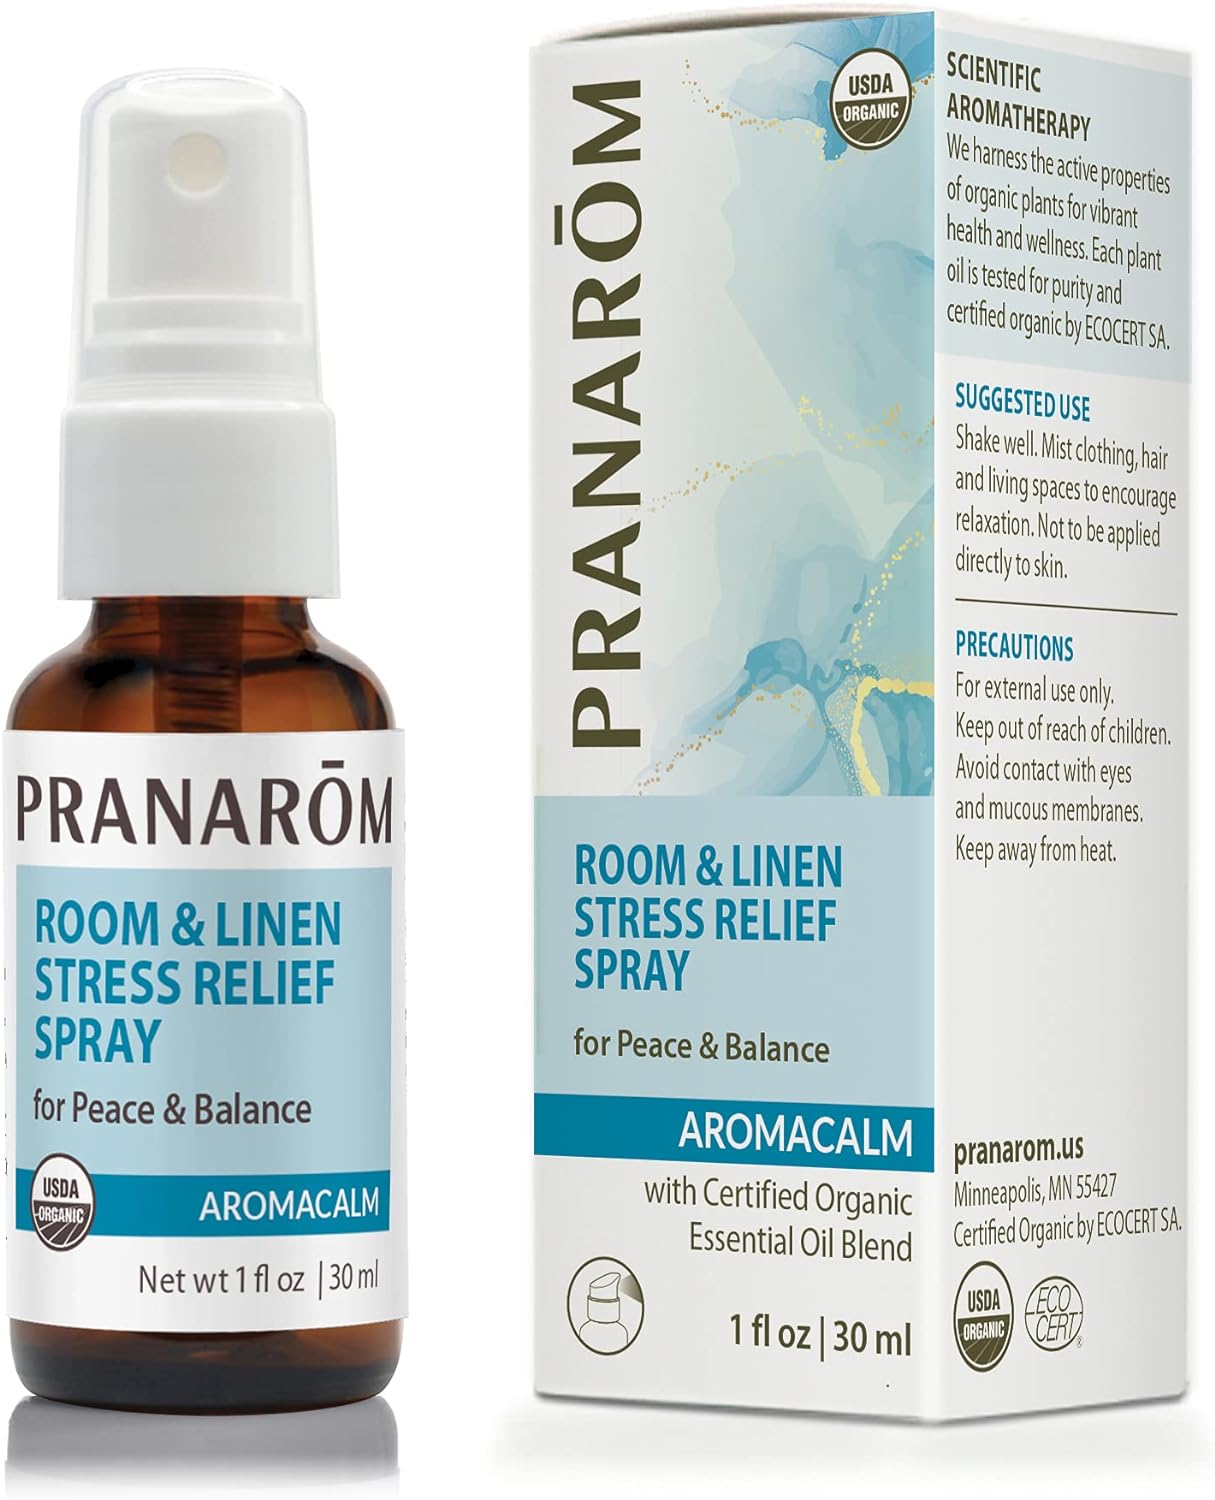 Pranarom - Aromacalm Room & Linen Stress Relief Spray (1oz / 30ml) - Orange, Bergamot, Lavender, Ylang Ylang - Essential Oil for Relaxation and Air Purification|USDA and ECOCERT Certified Organic